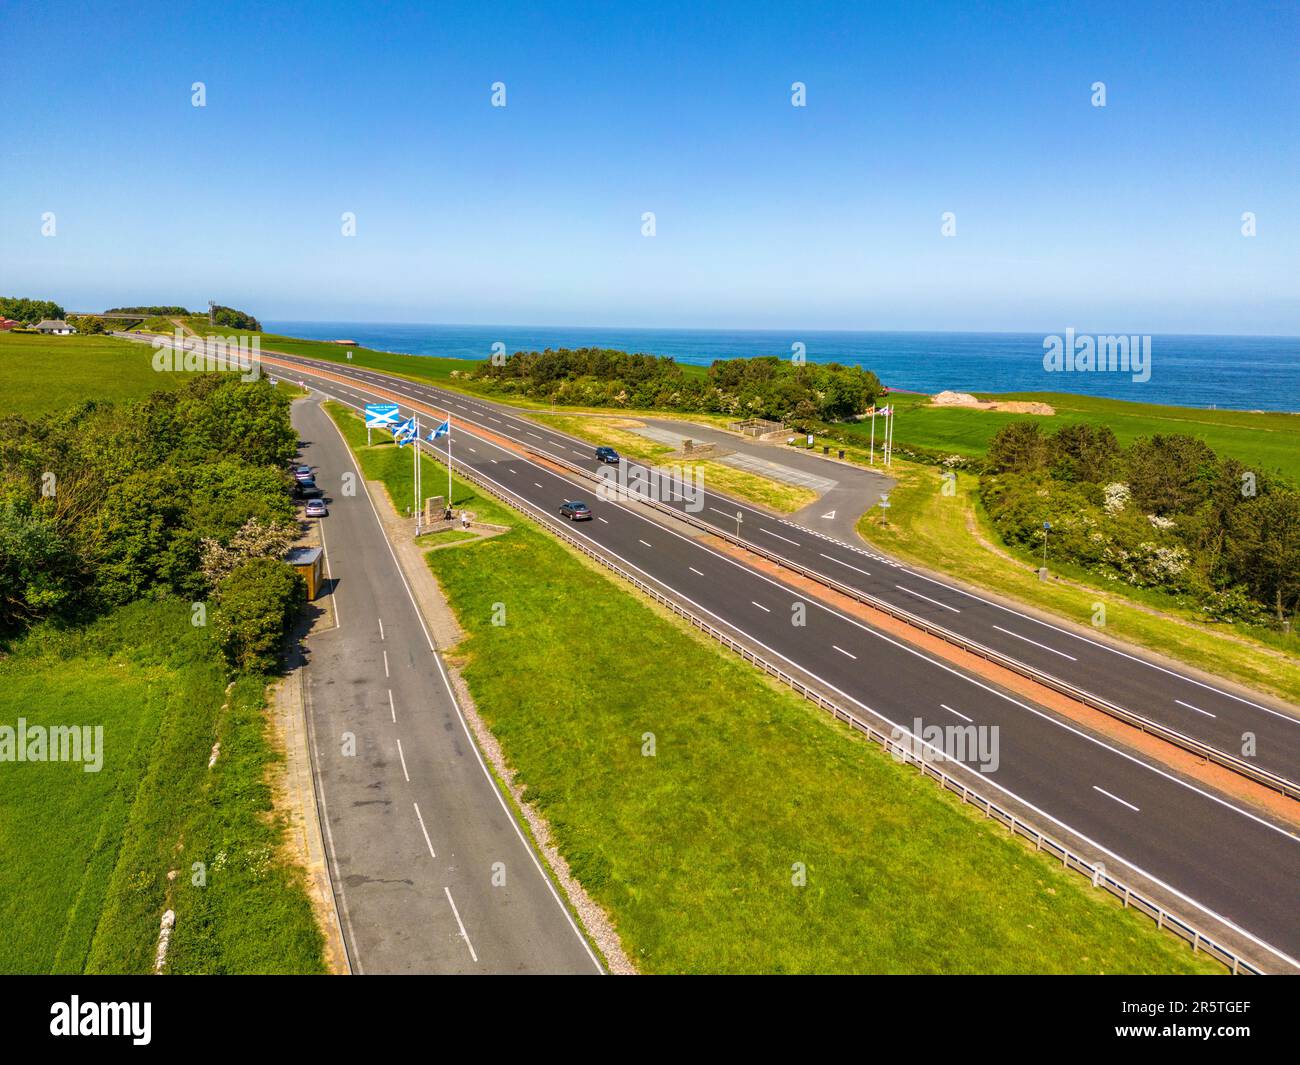 Looking north on the A1 road at the border of England & Scotland., UK. Stock Photo